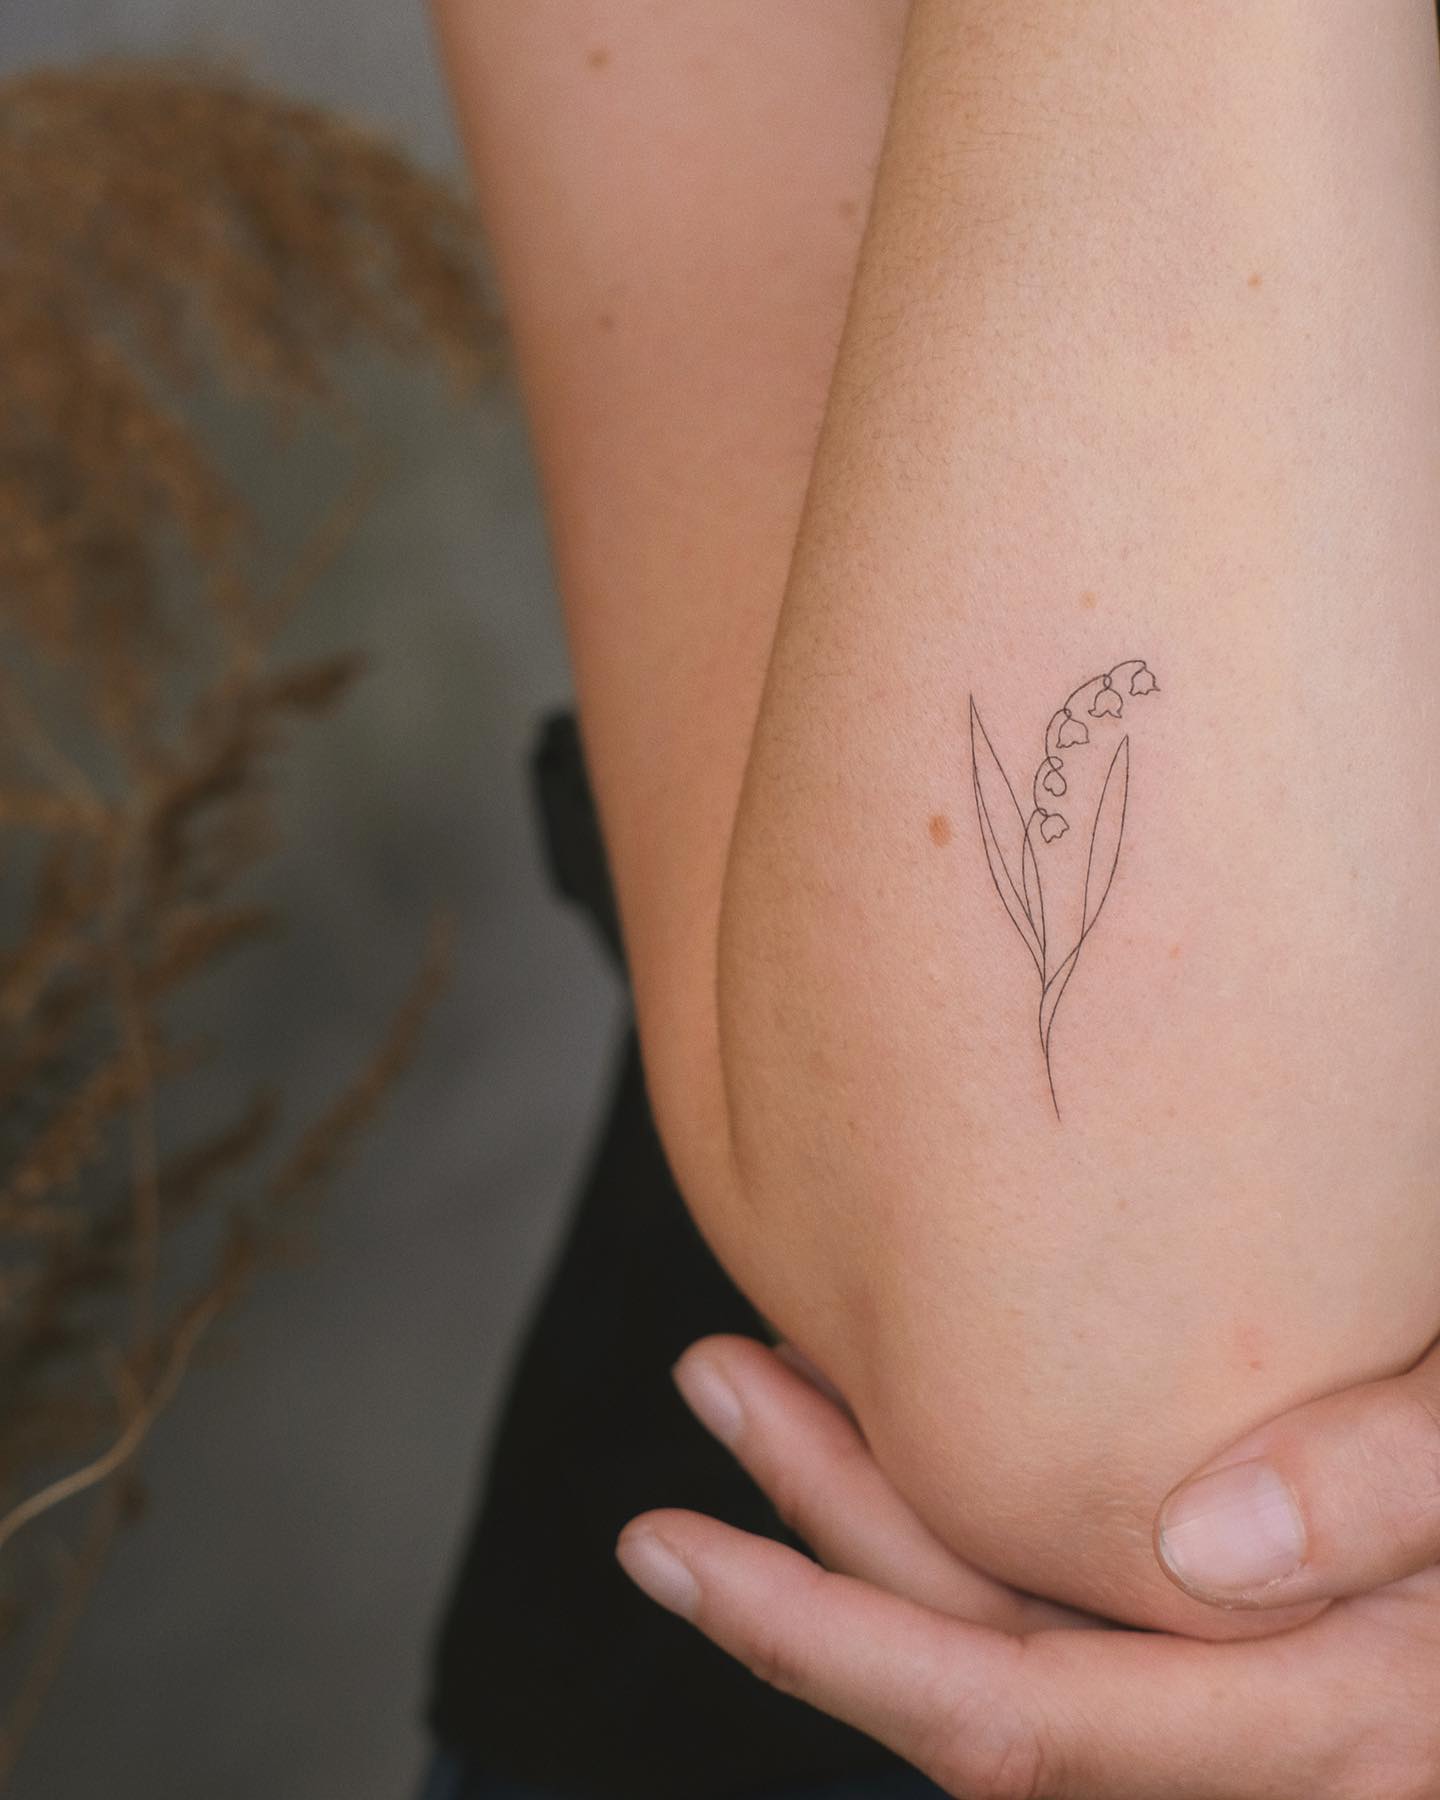 chrisstoness Lilyofthevalley flower outline with a daffodil outline  tattoo design